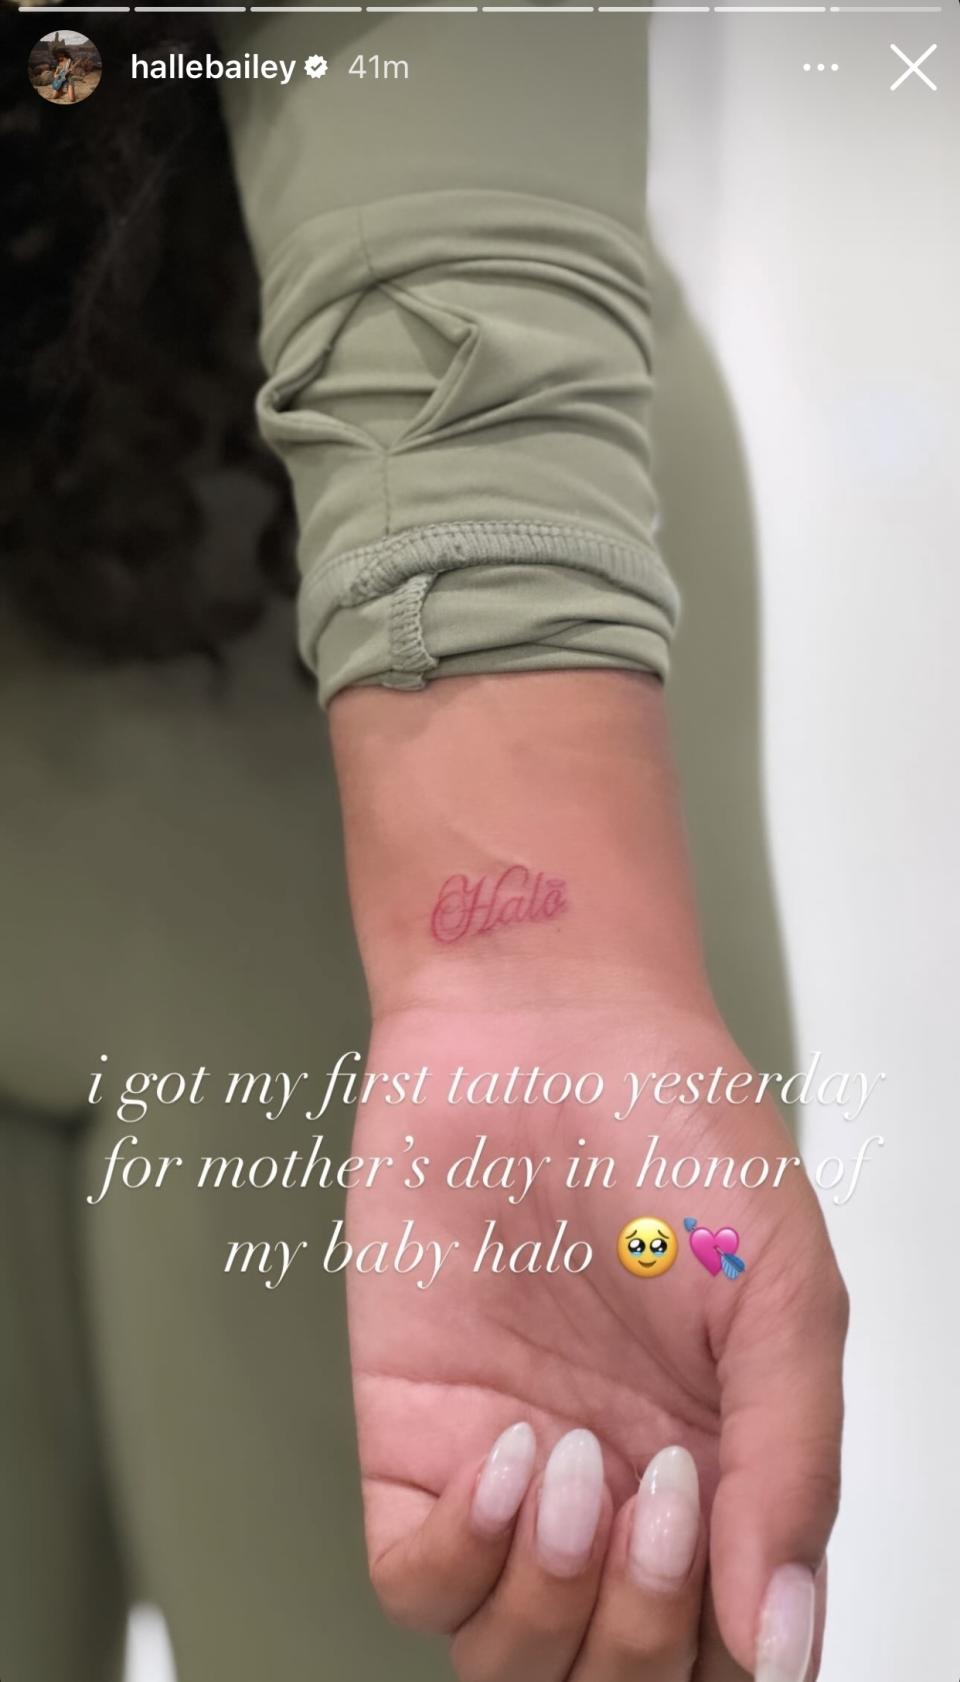 Person shows wrist with tattoo reading "Halo," caption mentions first tattoo for Mother's Day